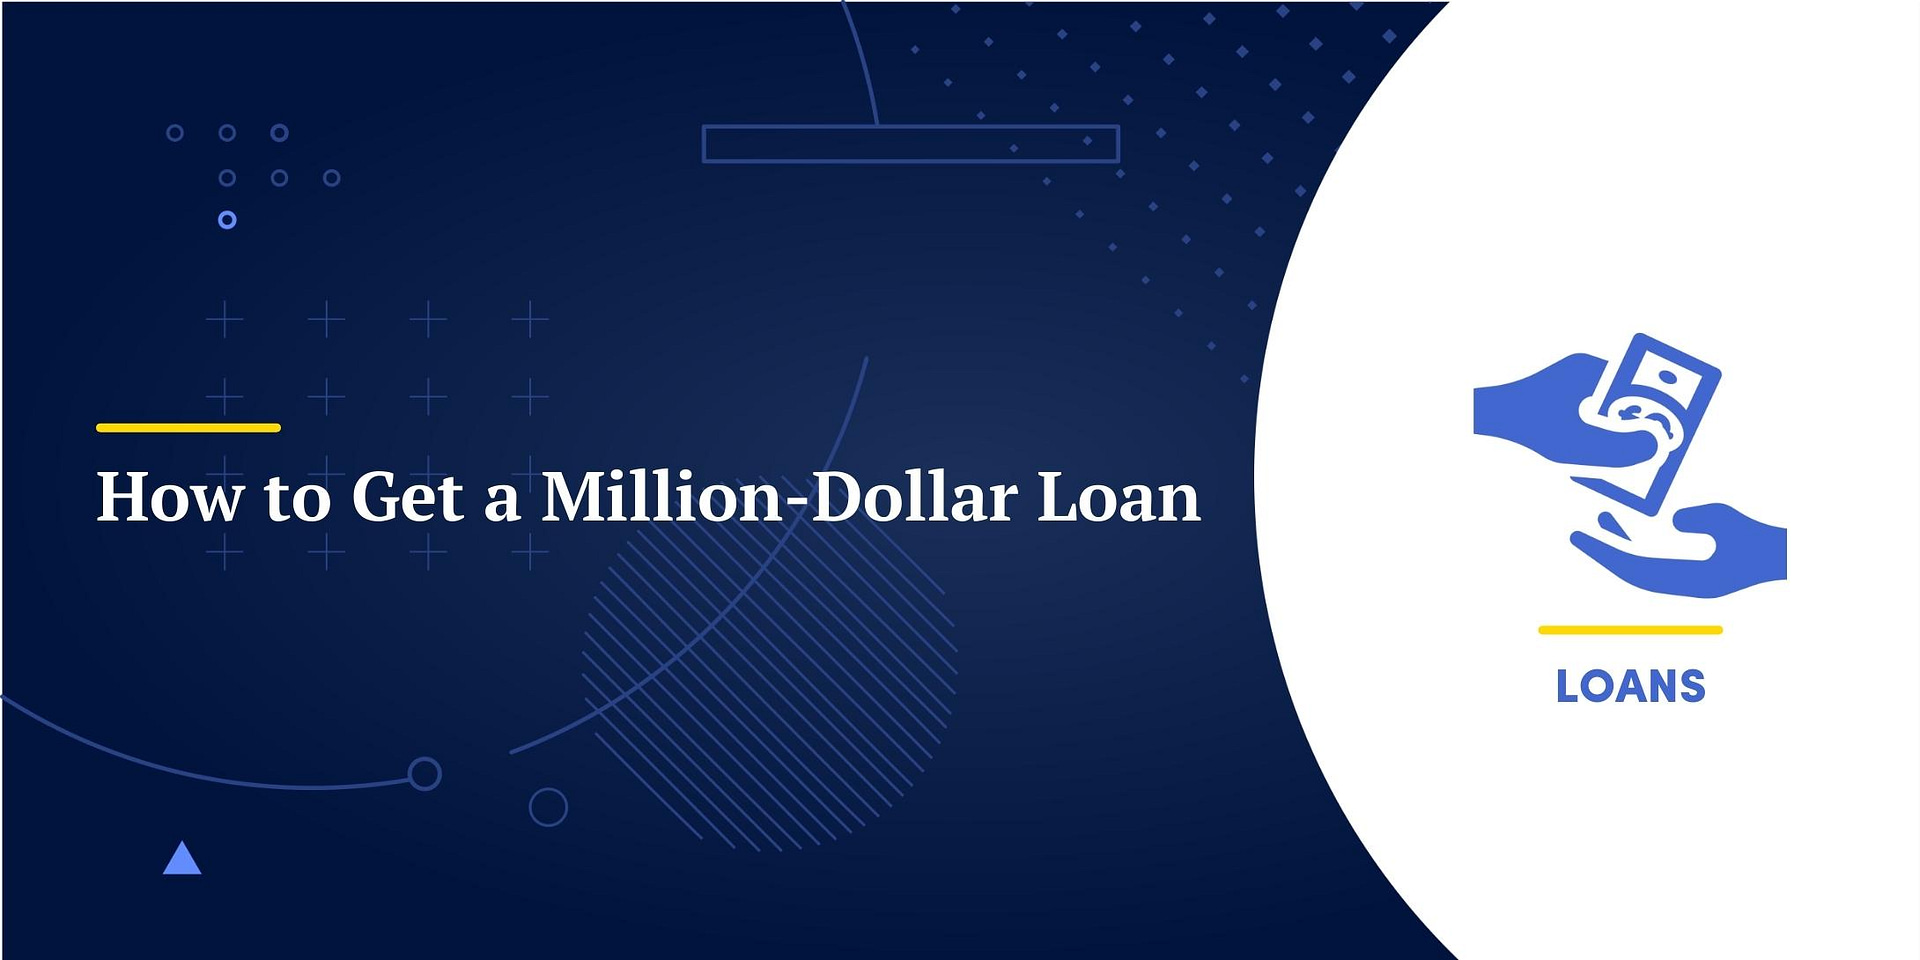 How To Get a 1 Million Dollar Business Loan 2023 - The Essential Guide